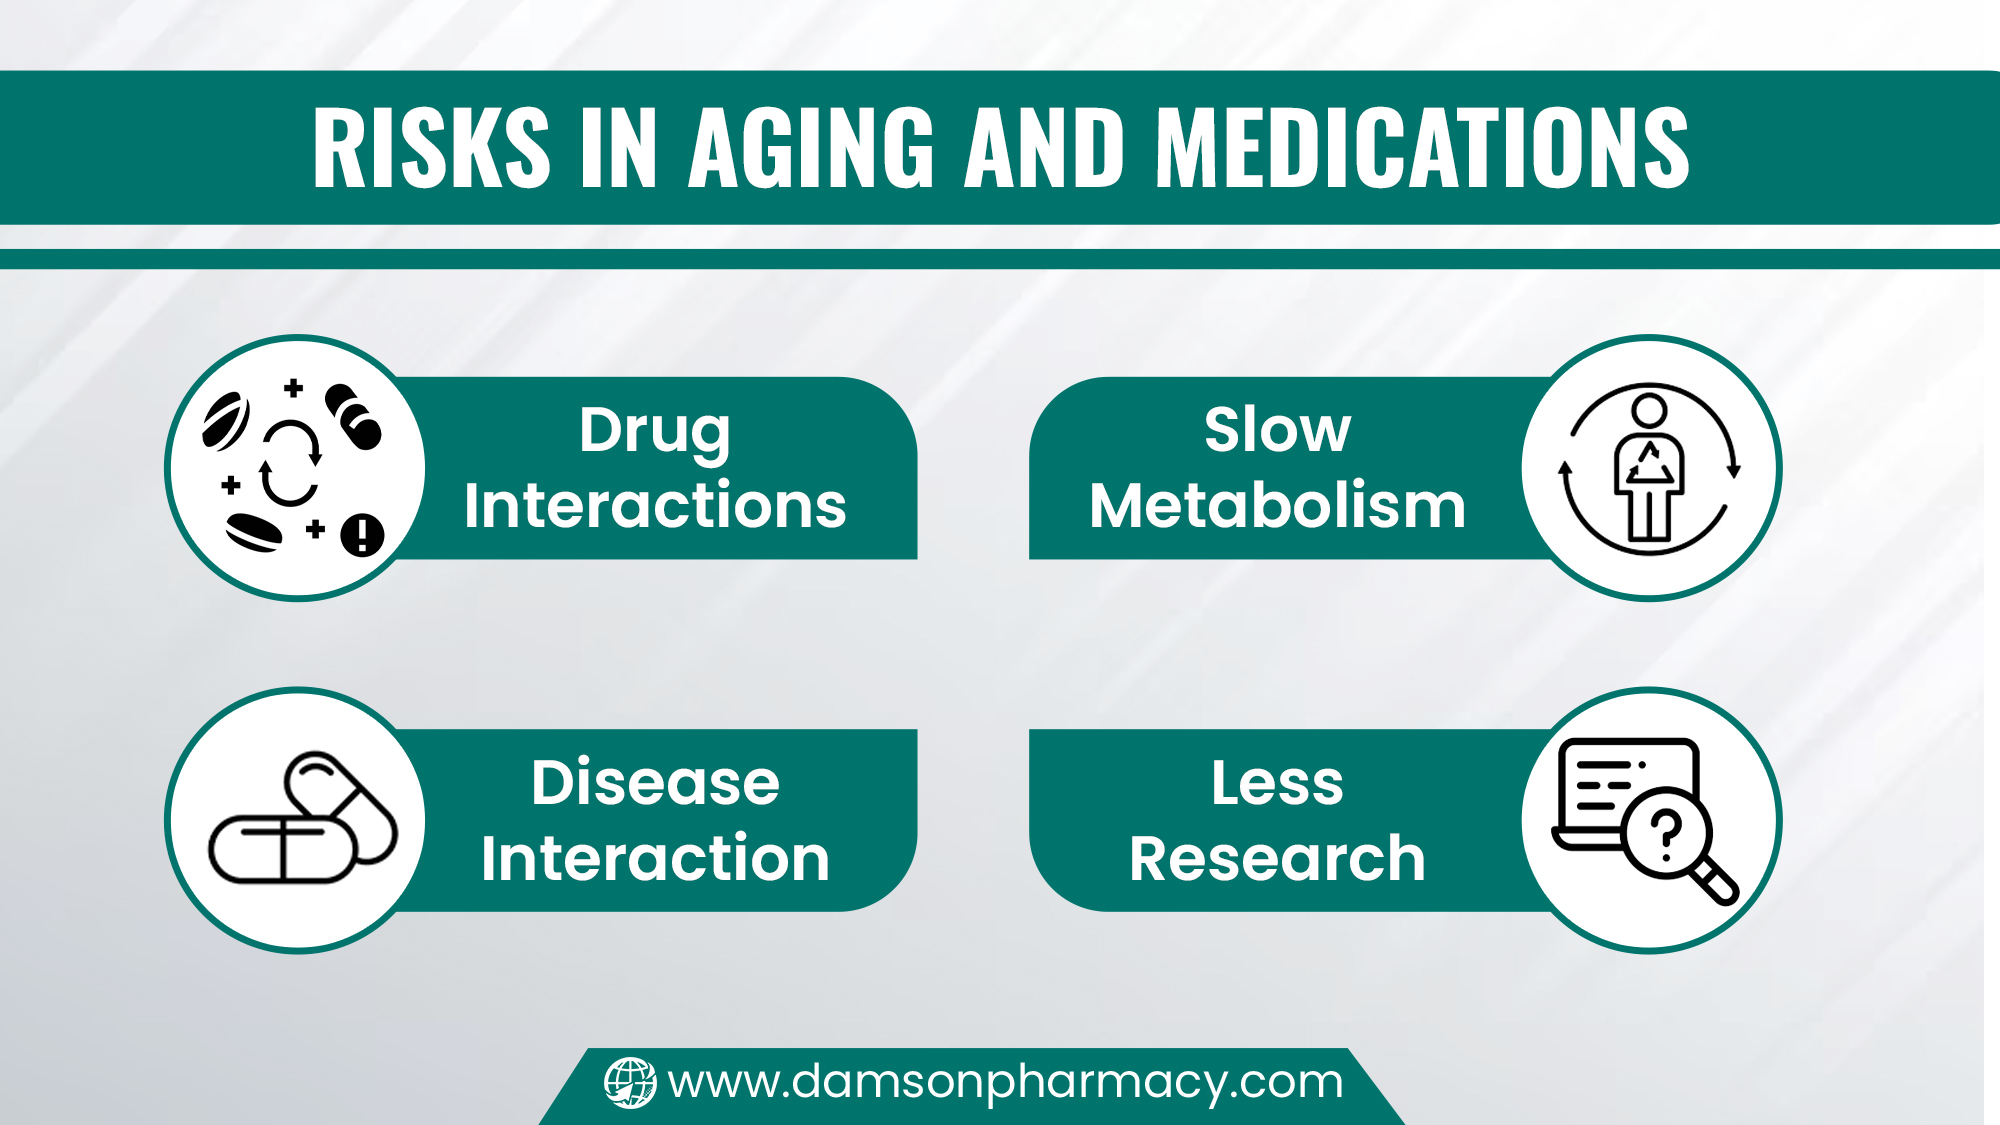 Risks in Aging and Medications